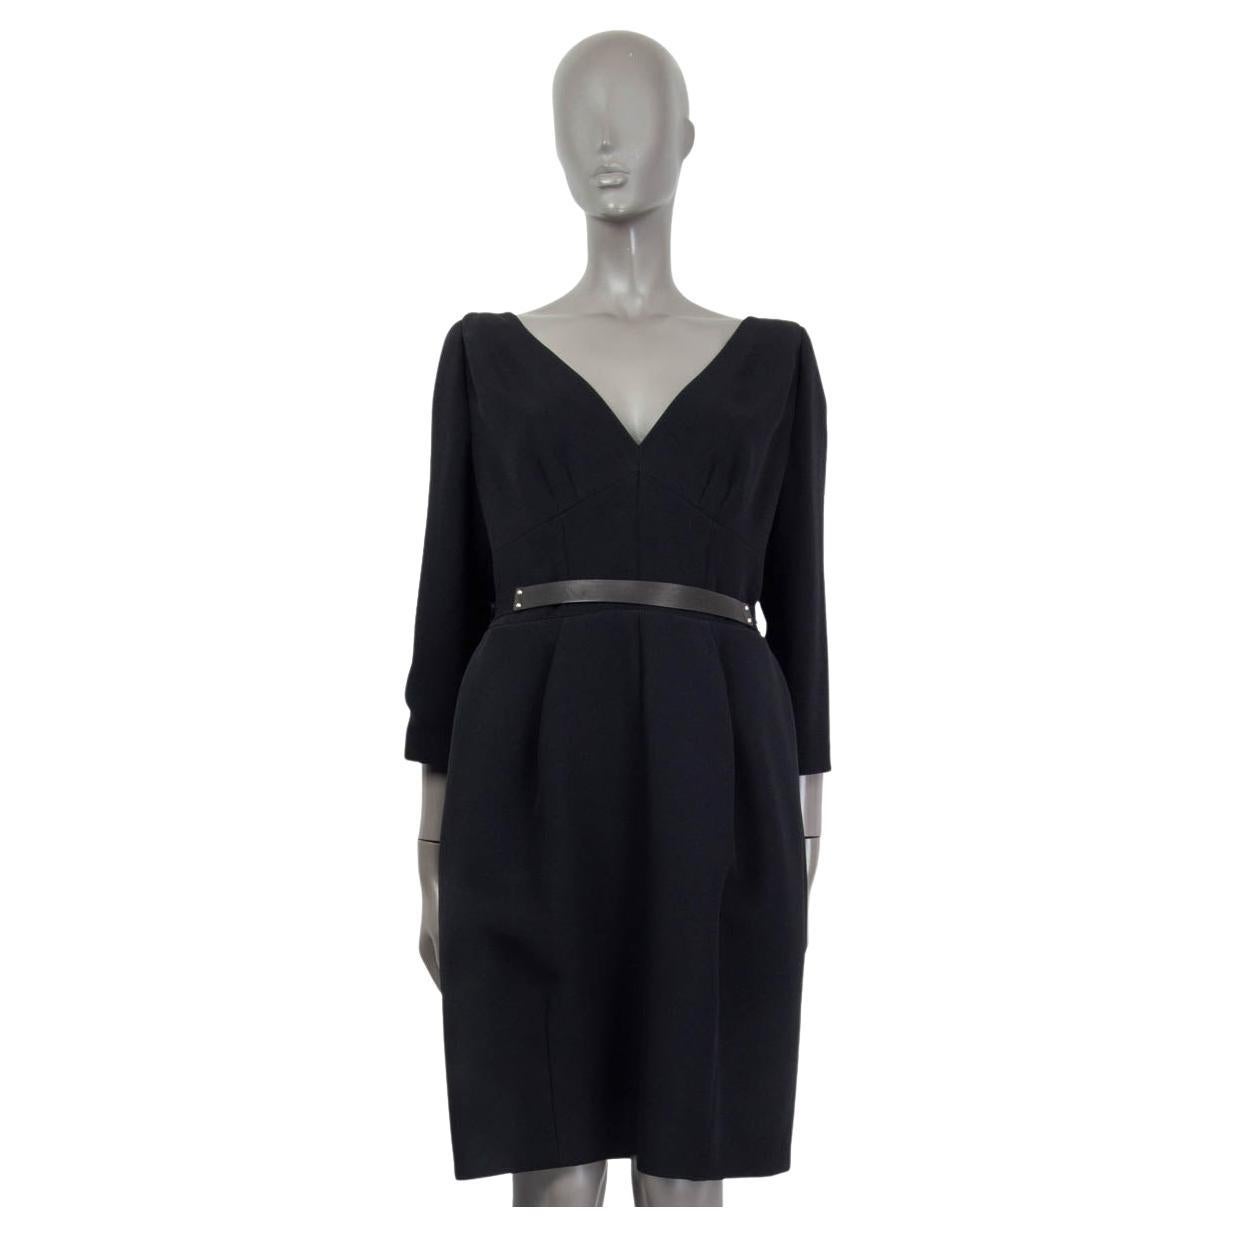 LOUIS VUITTON black LEATHER BELTED 3/4 SLEEVE Dress 44 XL For Sale